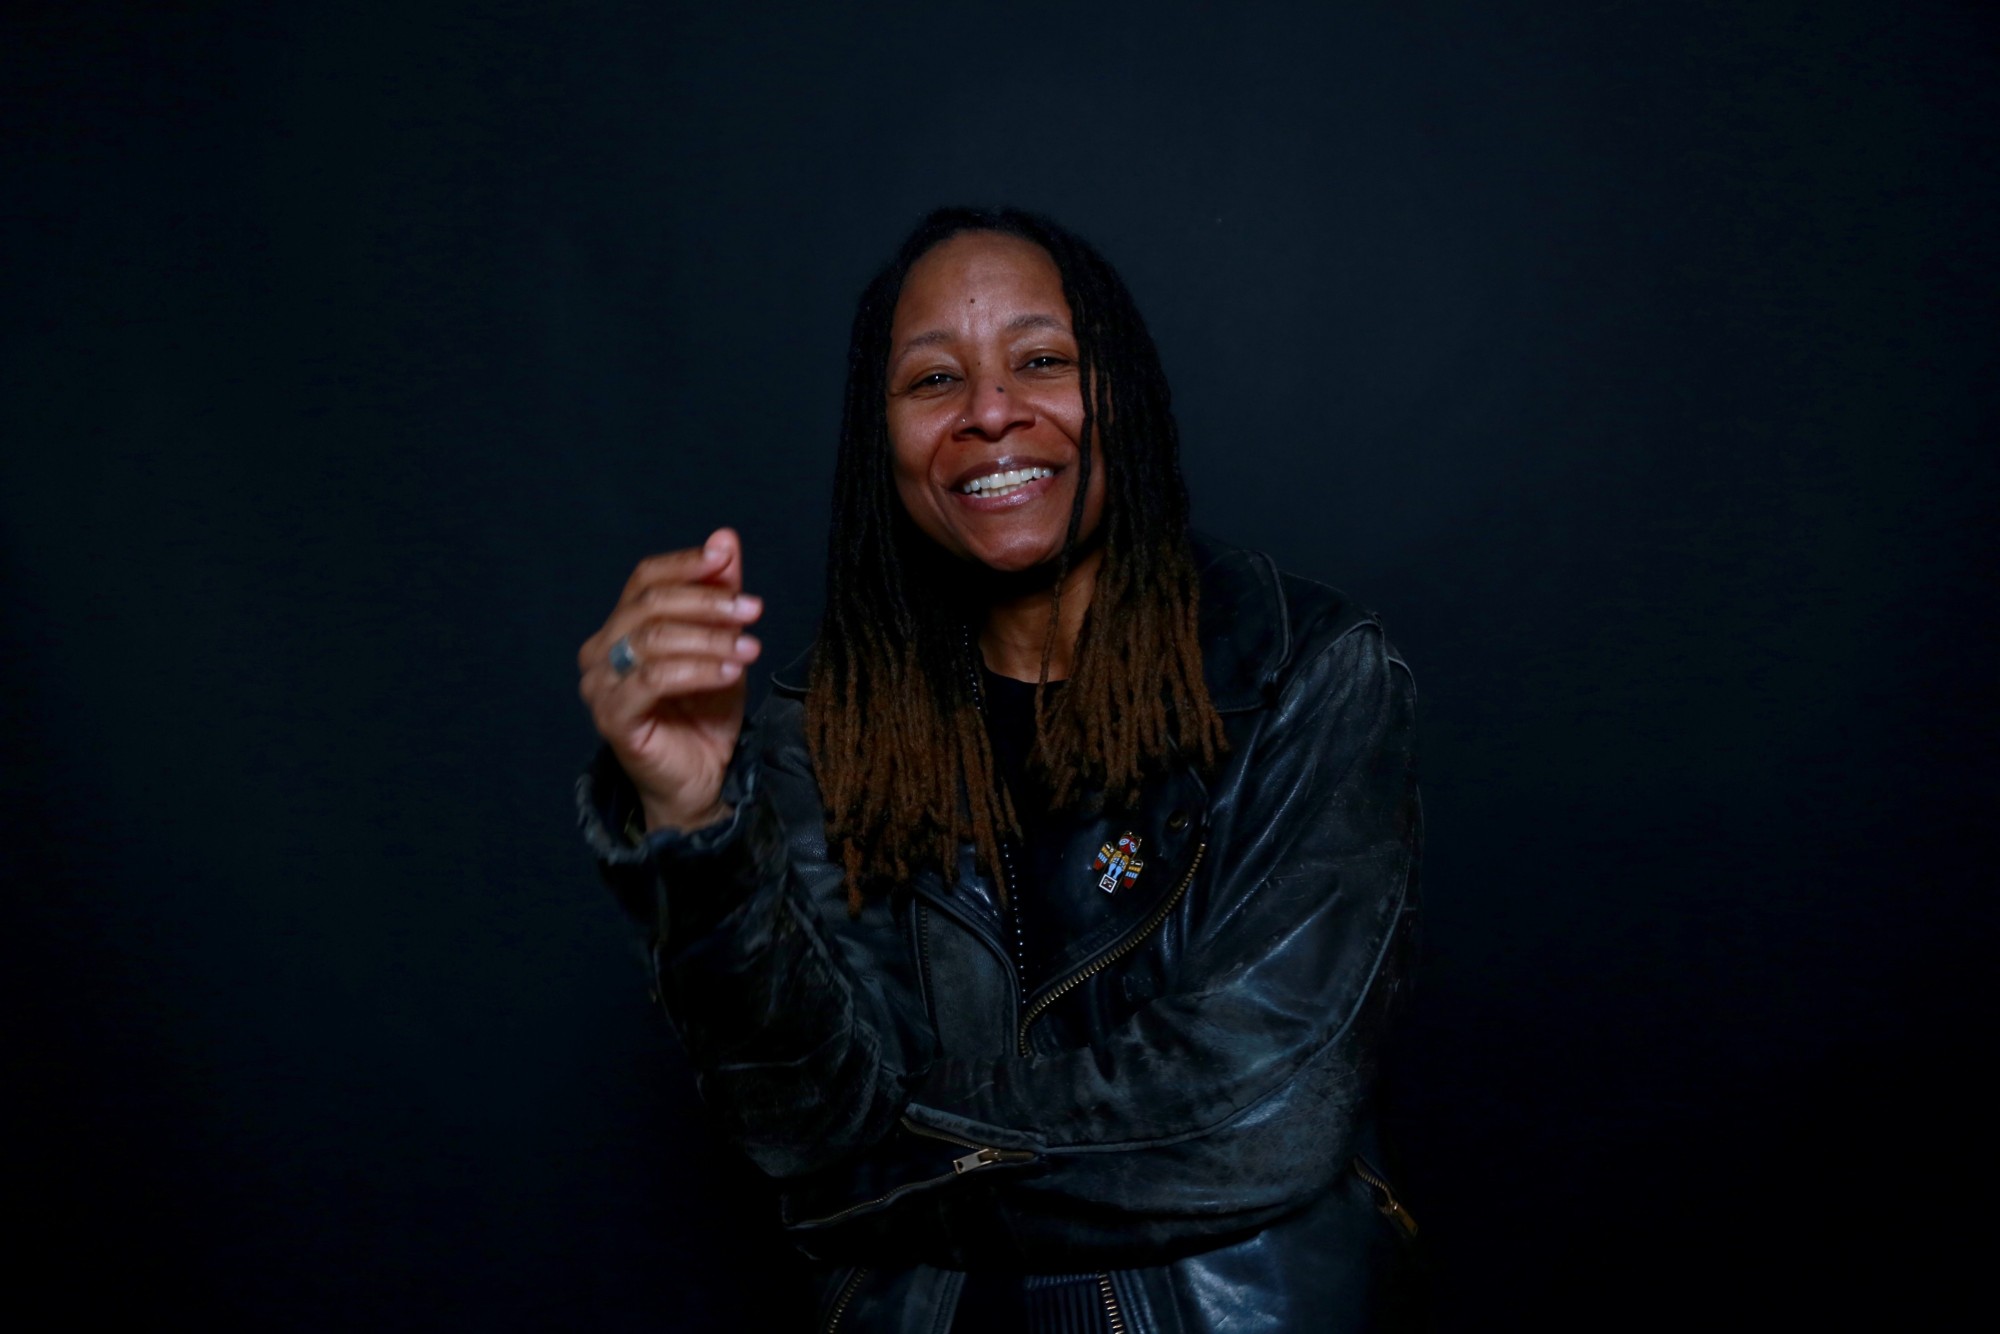 t’ai freedom ford is wearing a black leather jacket and standing in front of a black background. She is looking at the camera and smiling, her hand lifted in front of her and out of focus, as if in motion.